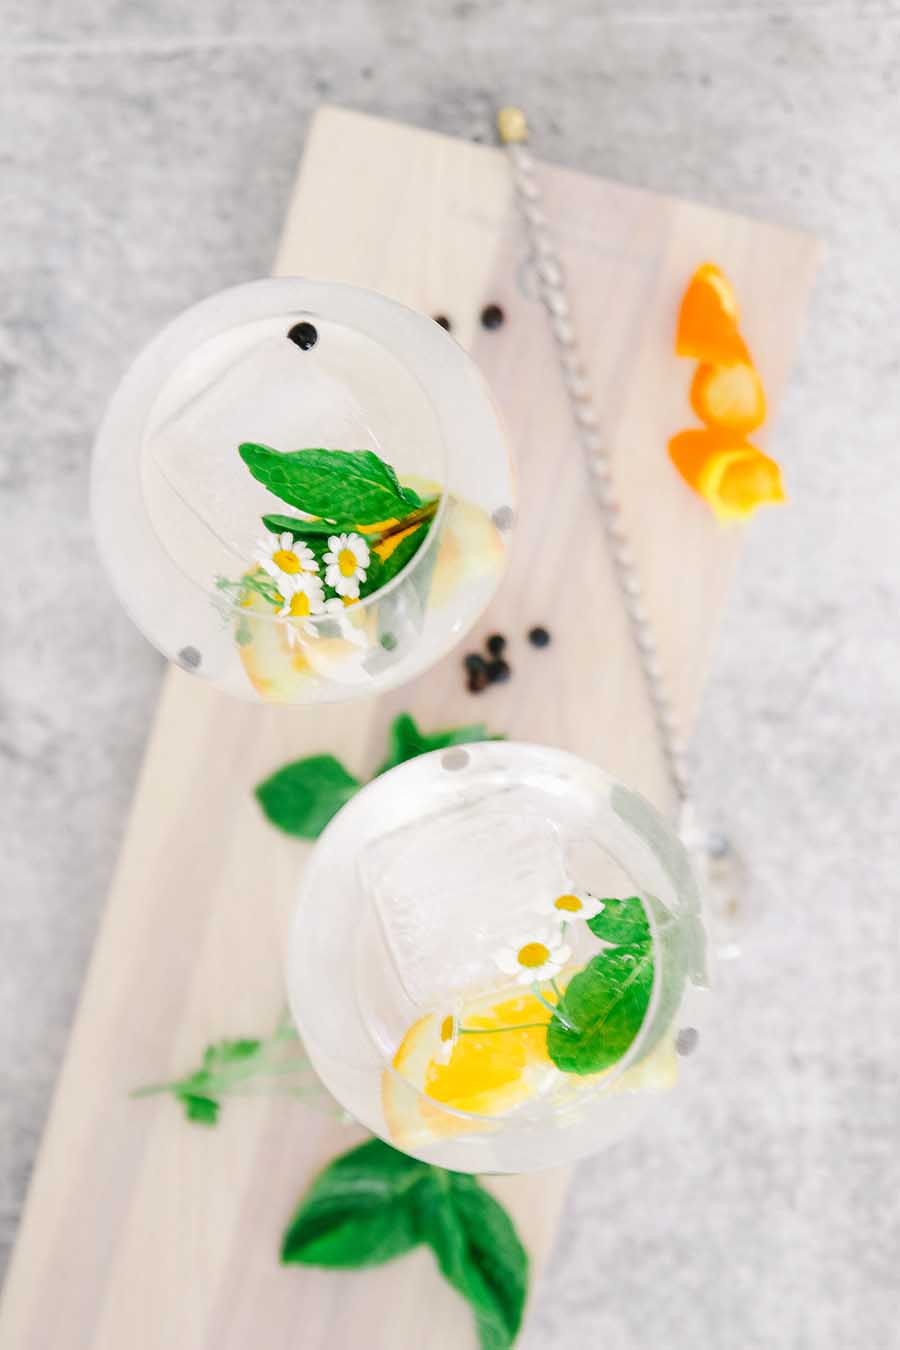 Gin and tonic in glasses with daisies in them.